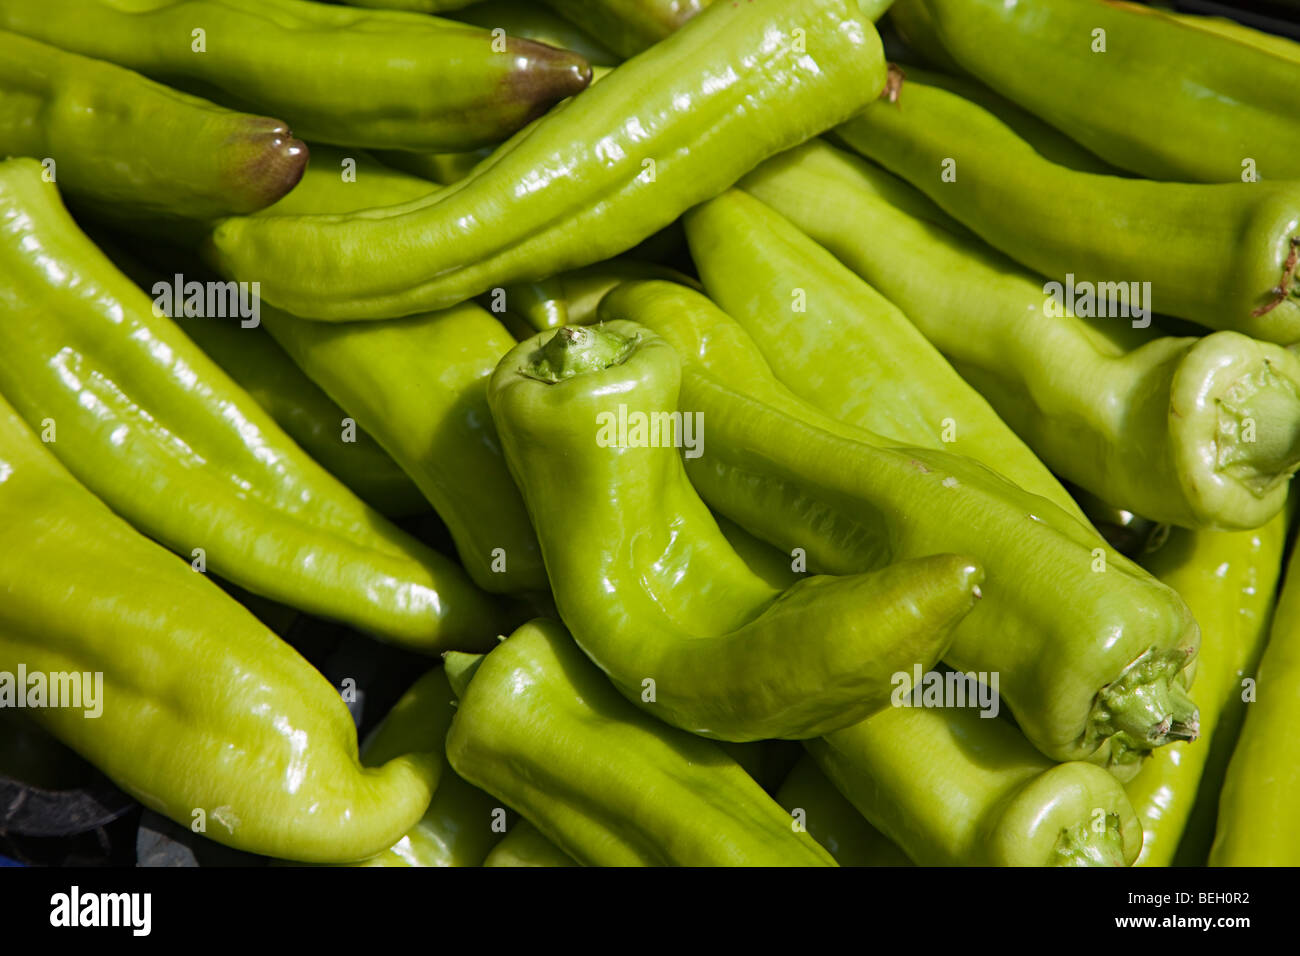 Green peppers on sale in market Mallorca Spain Stock Photo